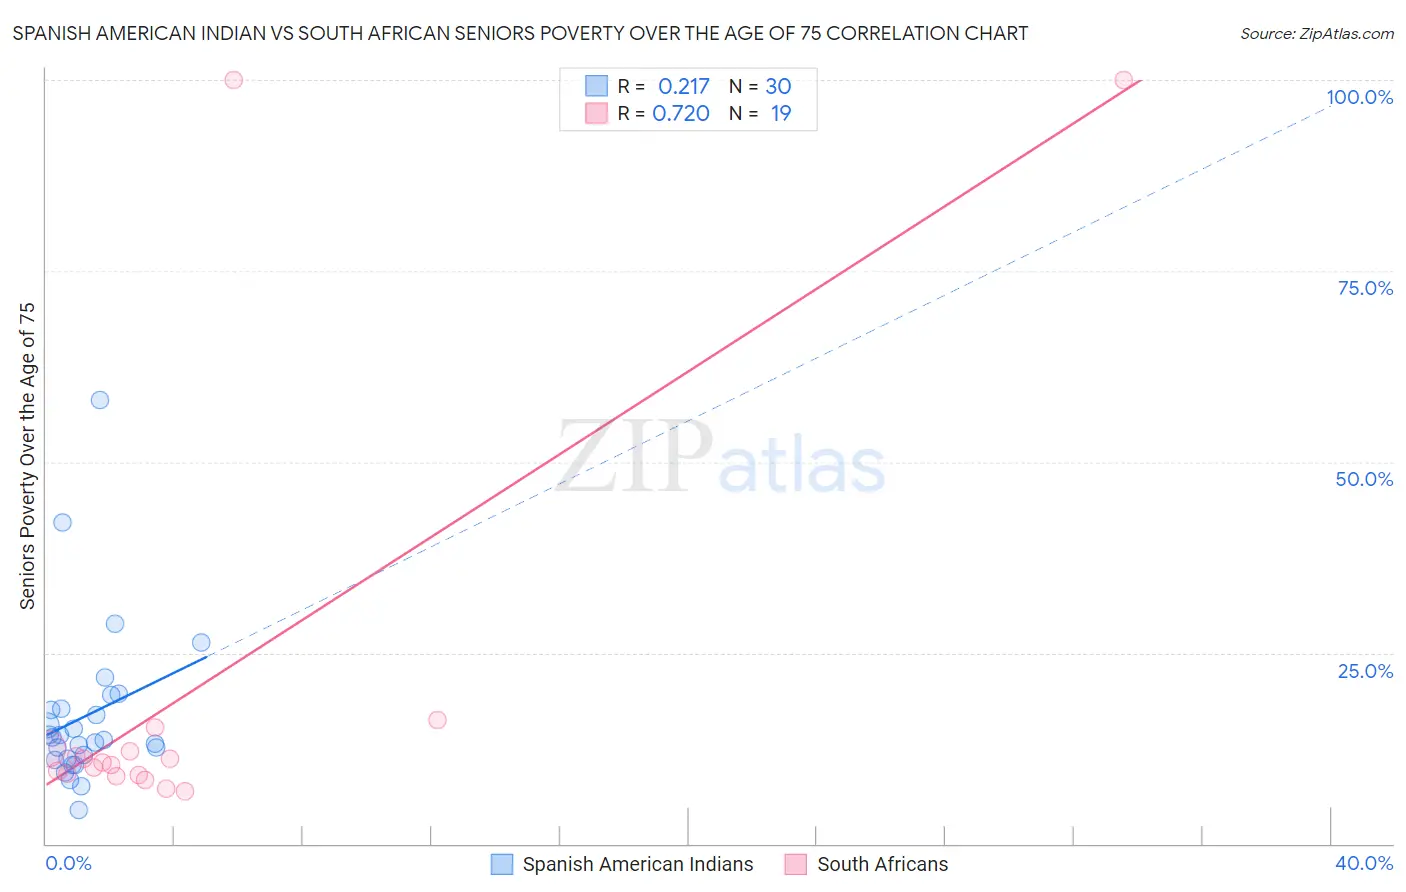 Spanish American Indian vs South African Seniors Poverty Over the Age of 75